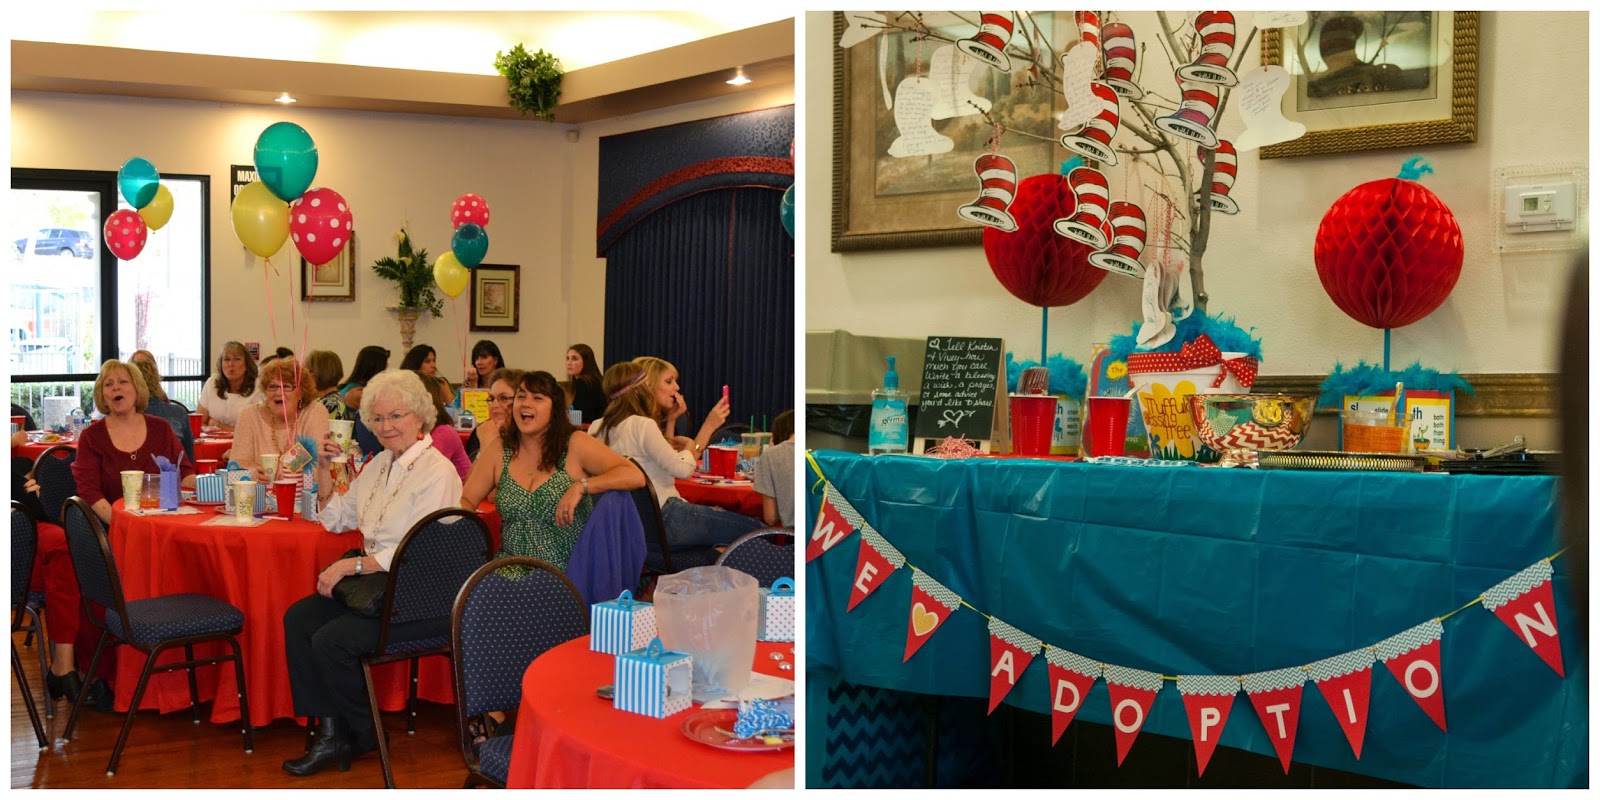 Our Dr. Suess themed adoption baby shower!